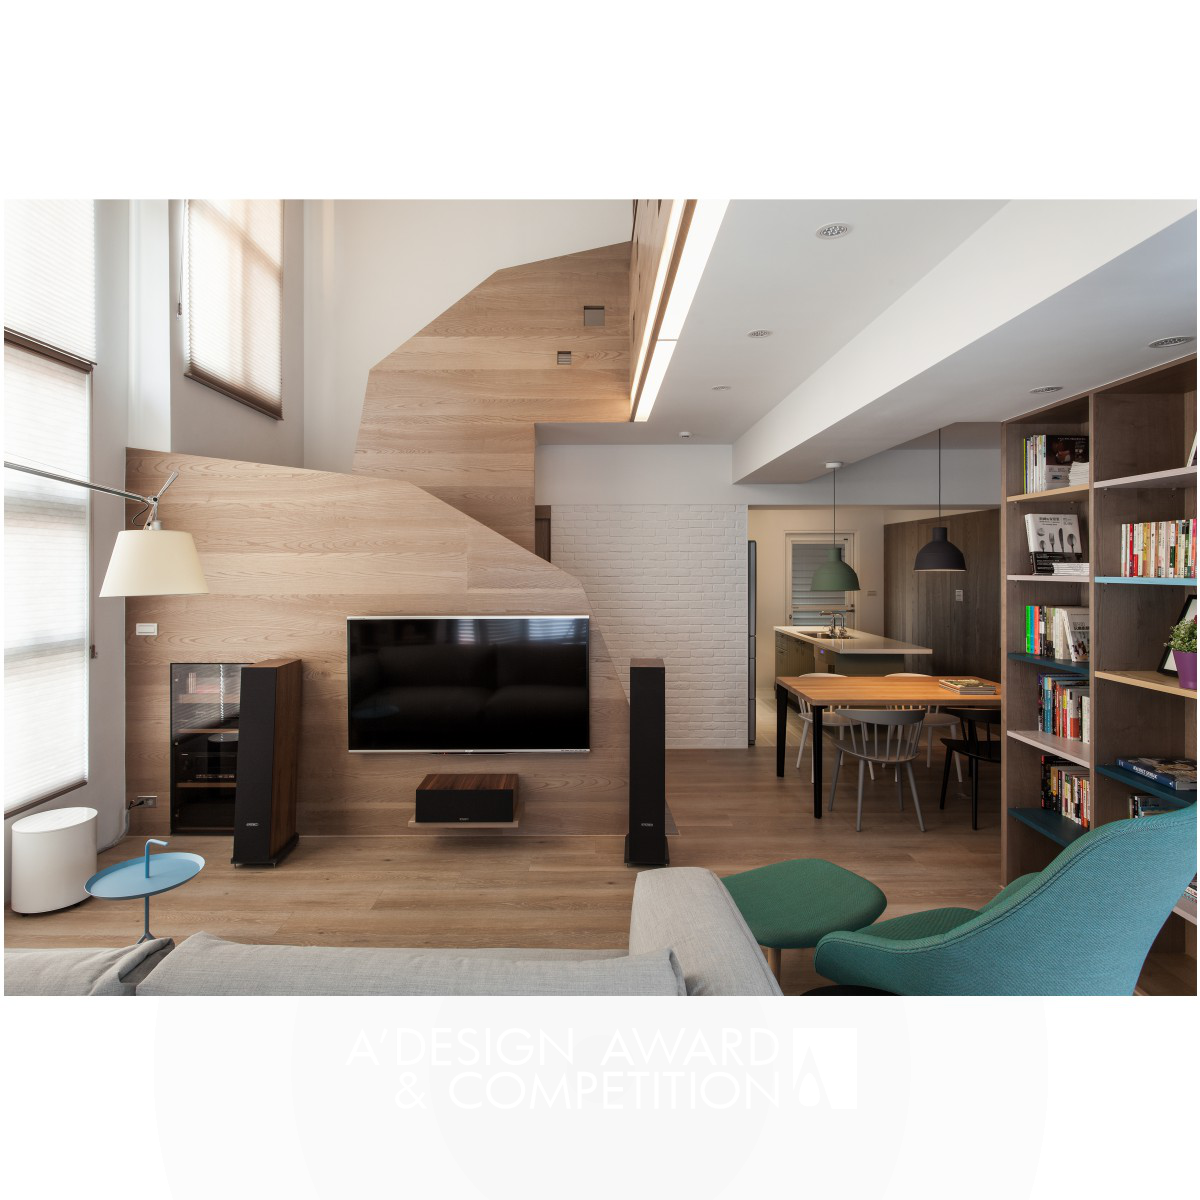 Transition Luminos View Residential Space / Multi Level by Hua Cheng , Hsian-Li Lo